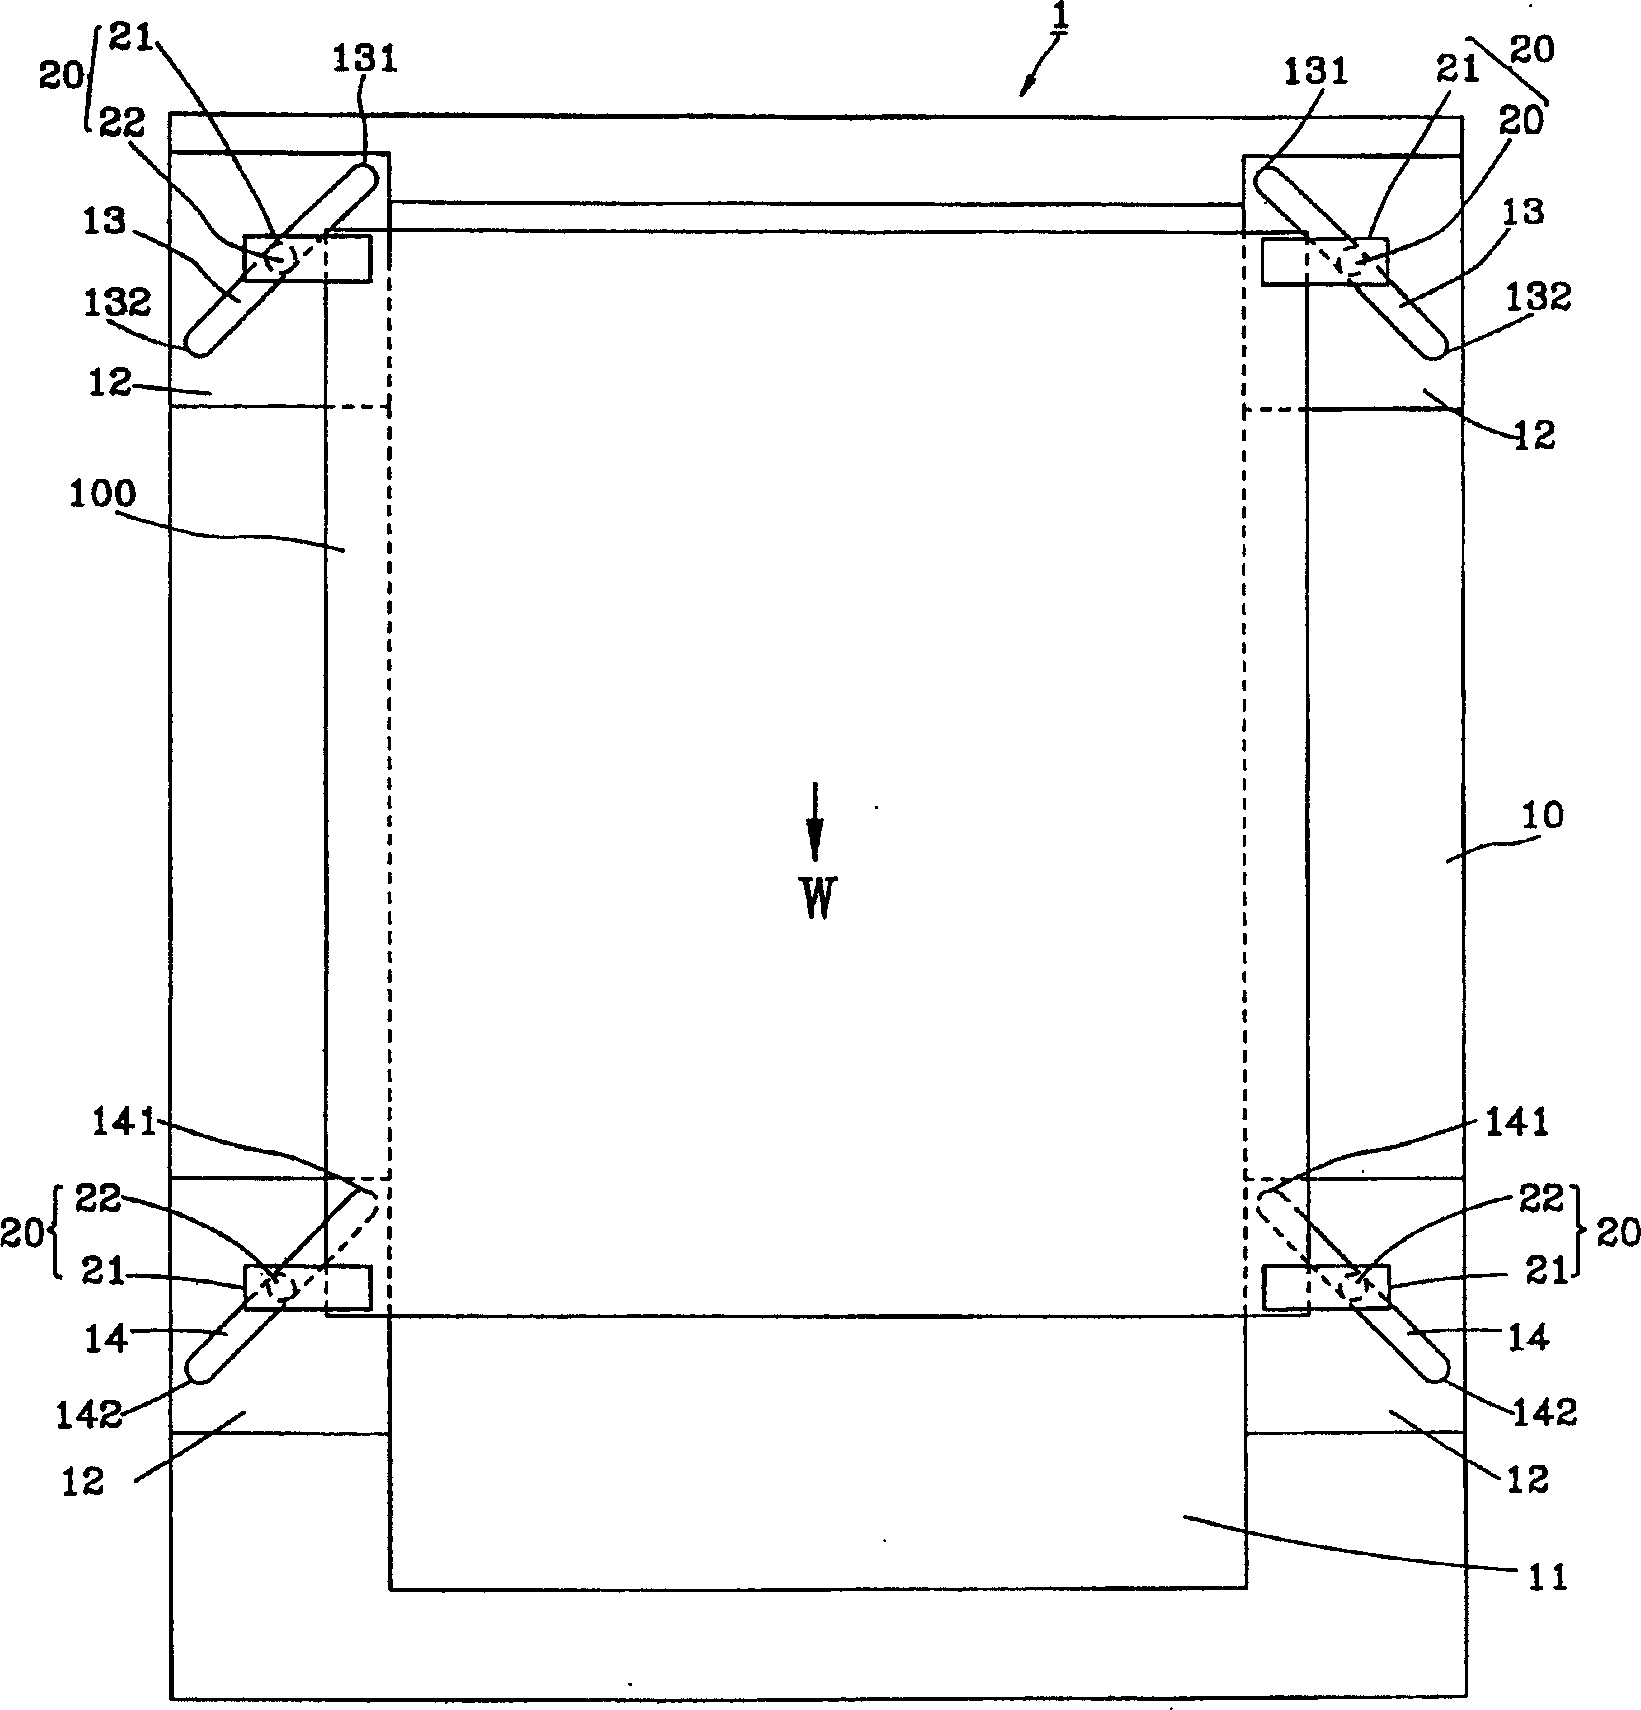 Apparatus for fixing platy object or flaky object